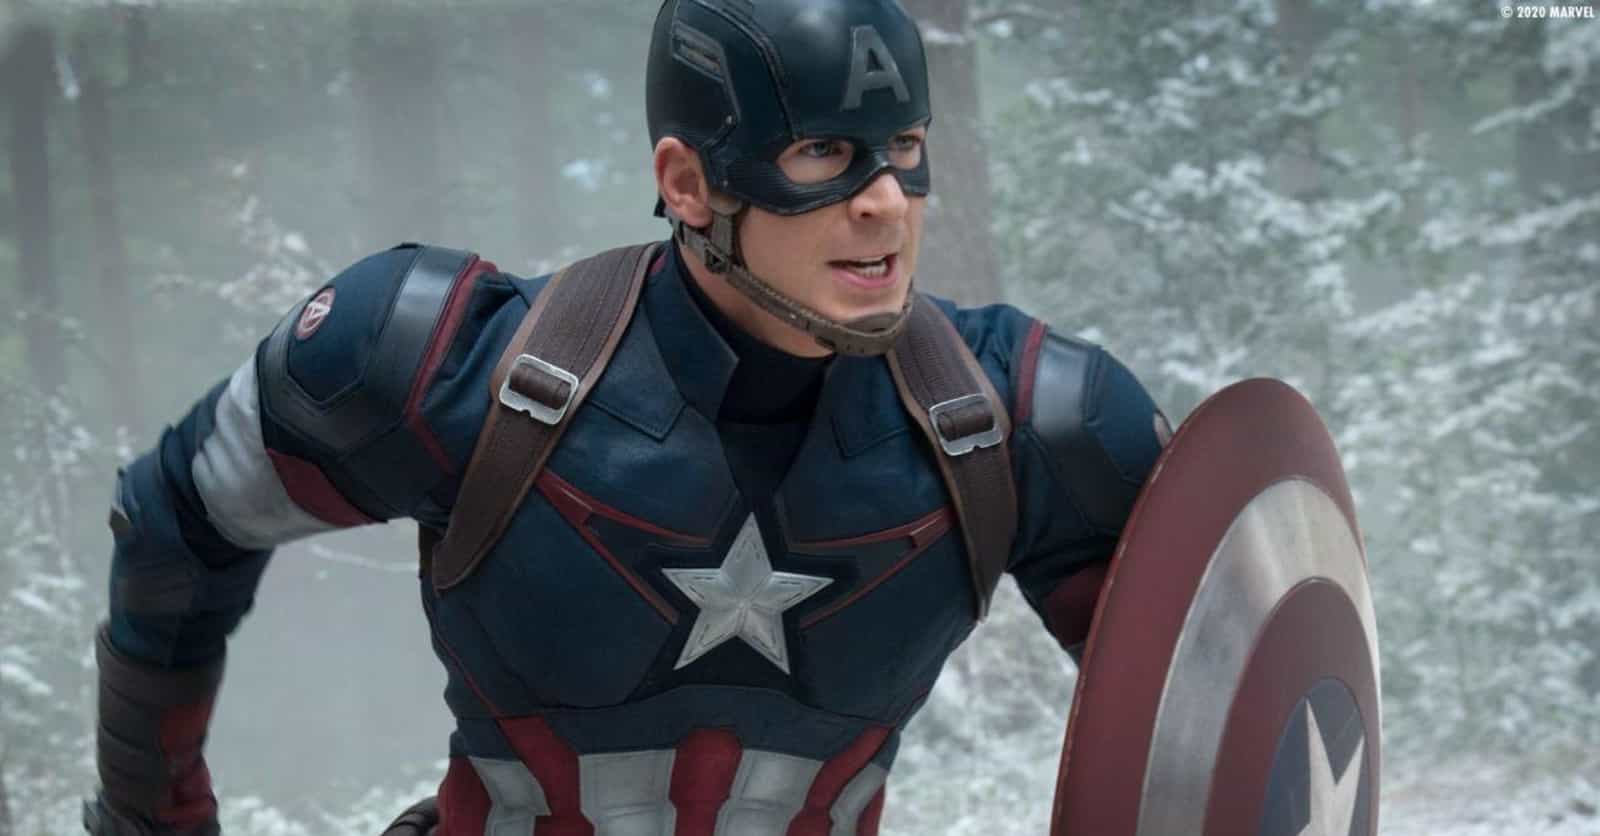 19 Character Details About Captain America You Missed The First Time Around